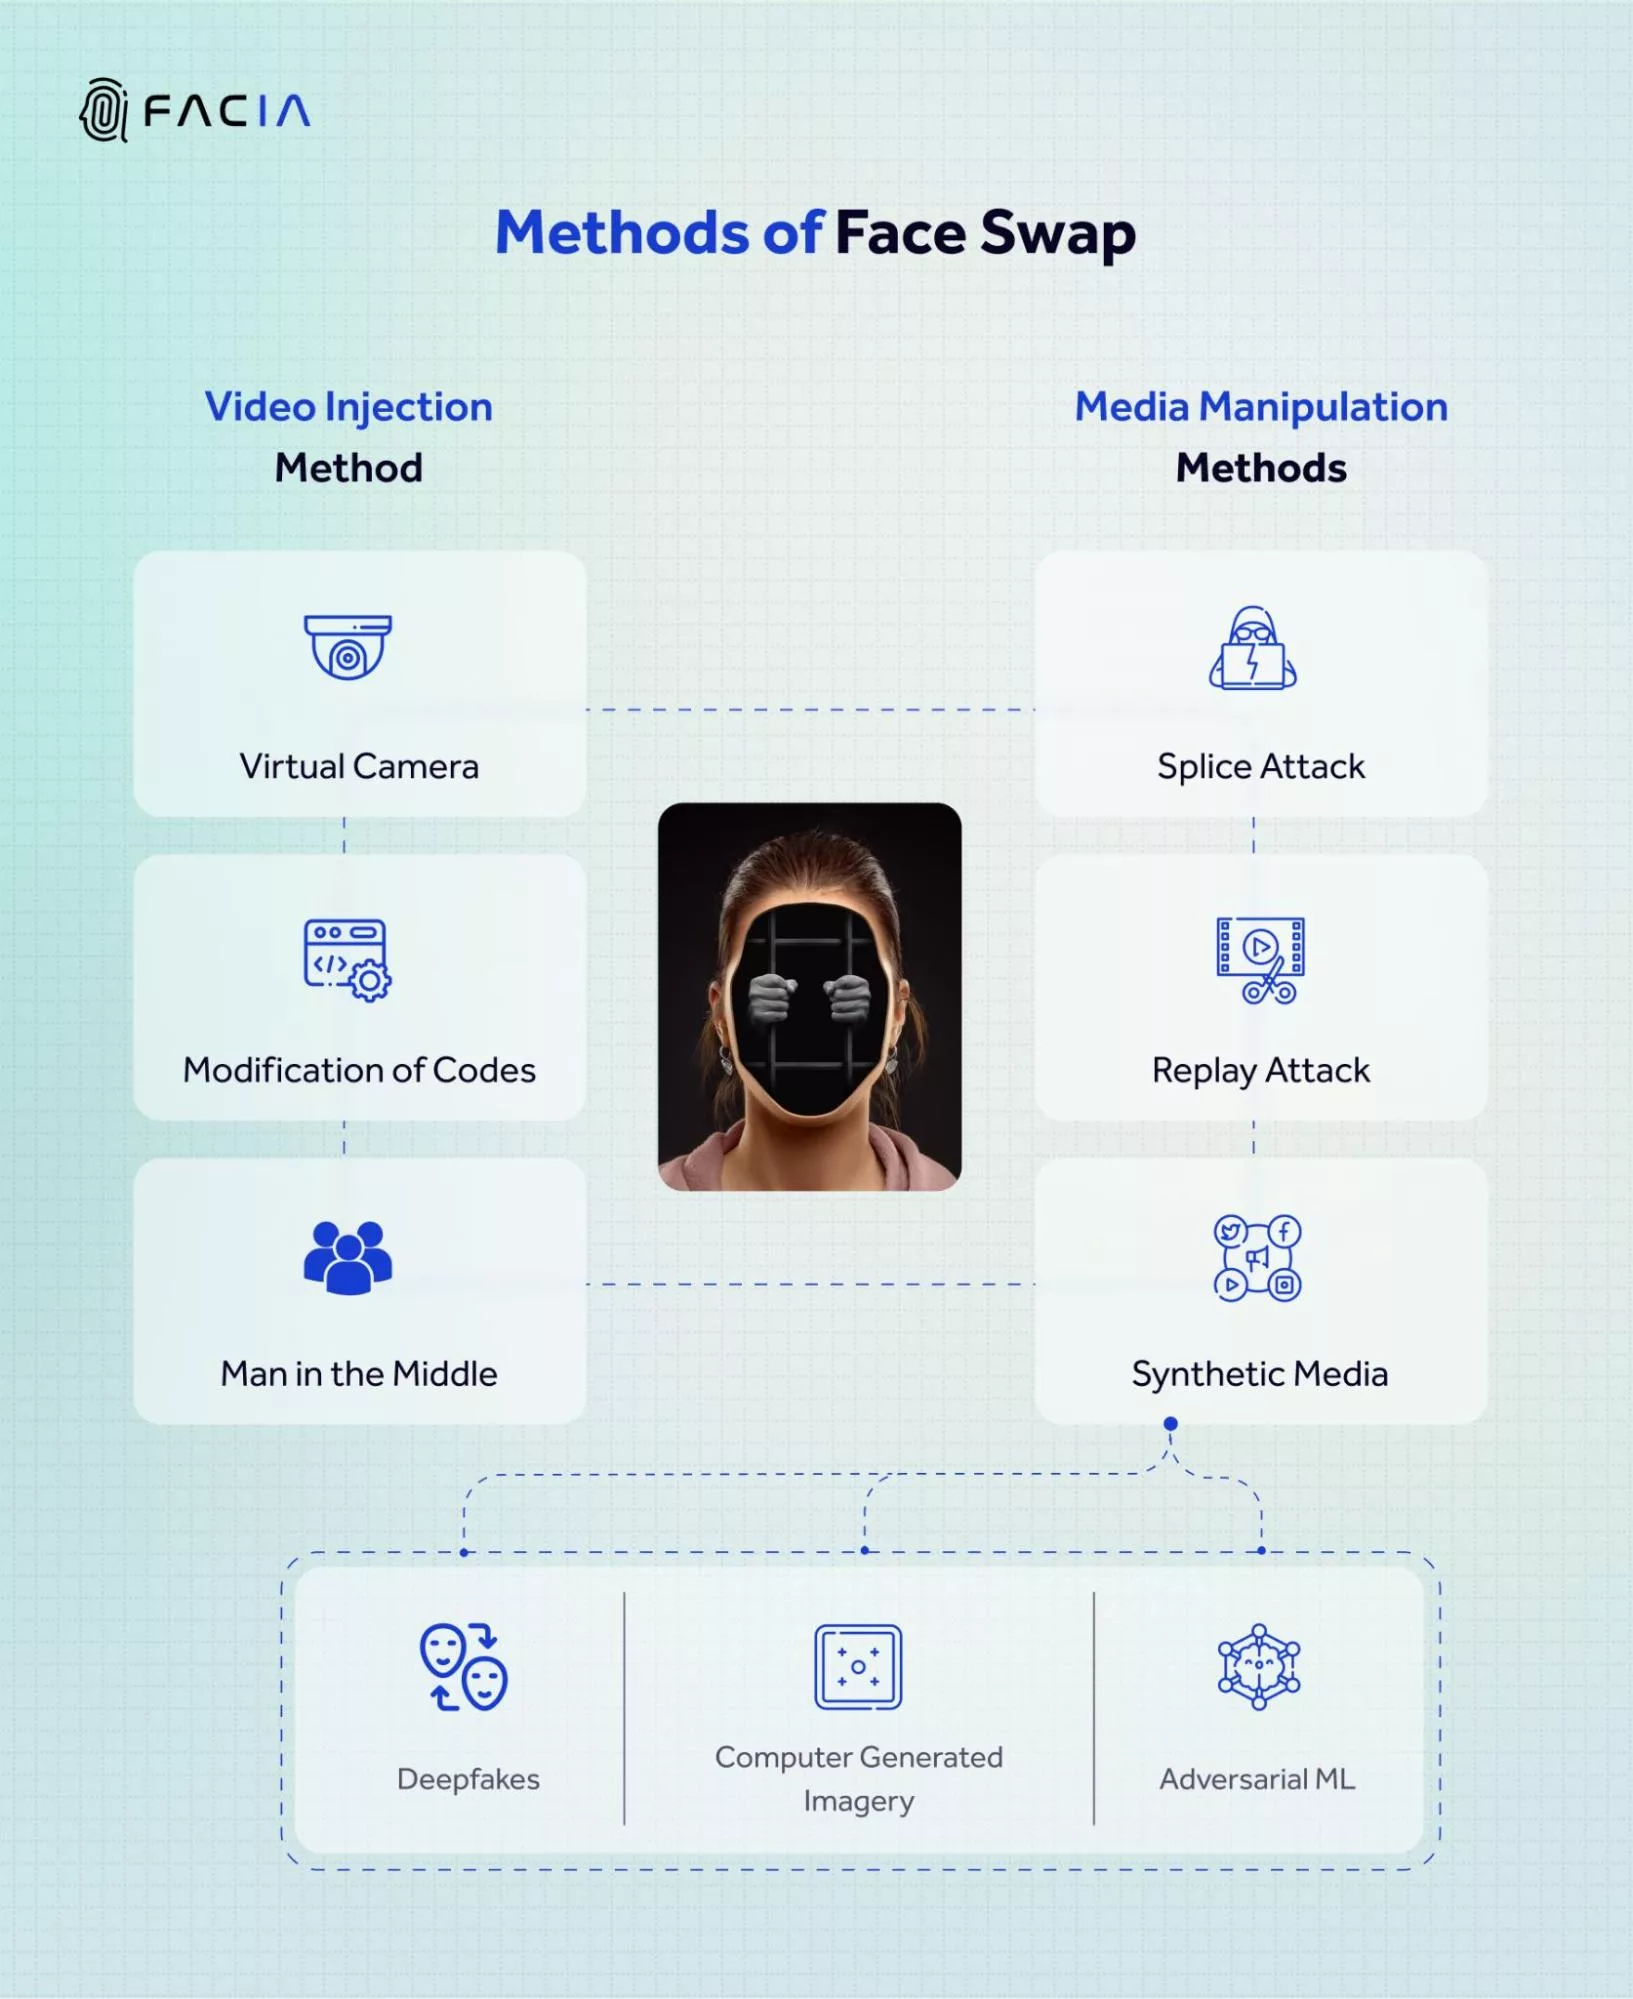 The infographic shows 2 Methods of online Face Swapping.